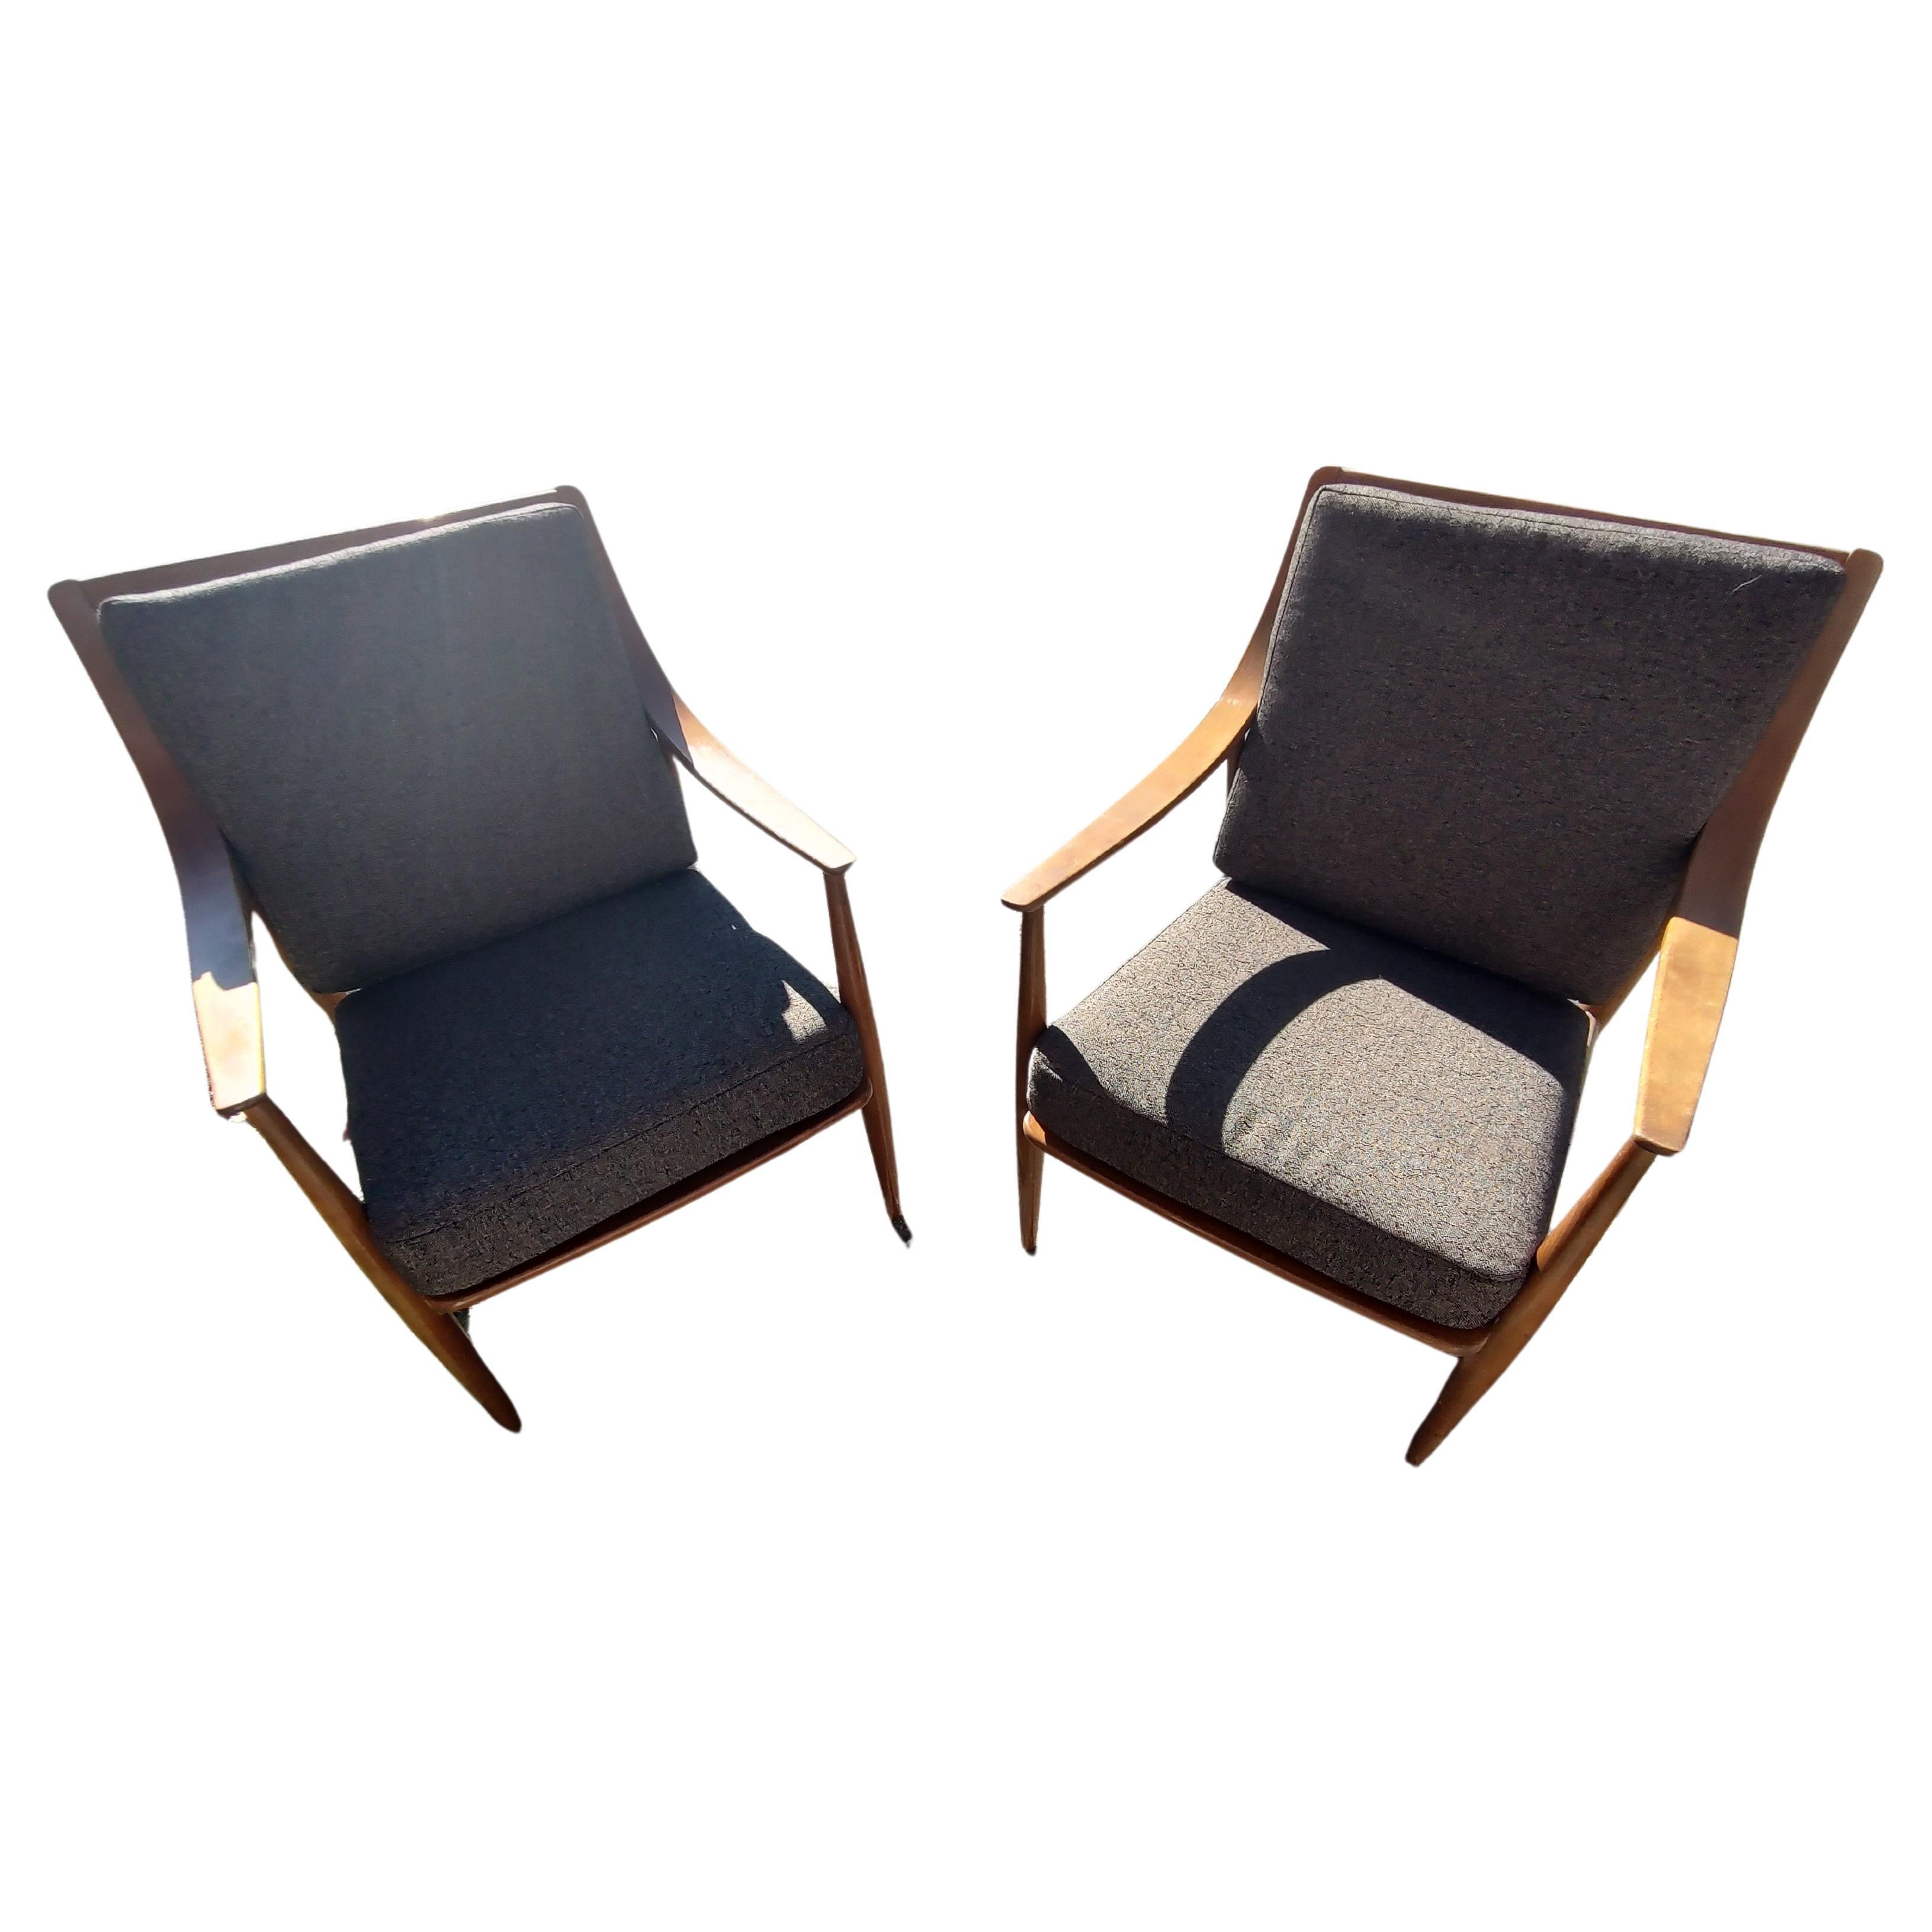 Mid-20th Century Pair of Mid-Century Modern Lounge Chairs by Peter Hvidt & Olga Molgaard Neilson  For Sale